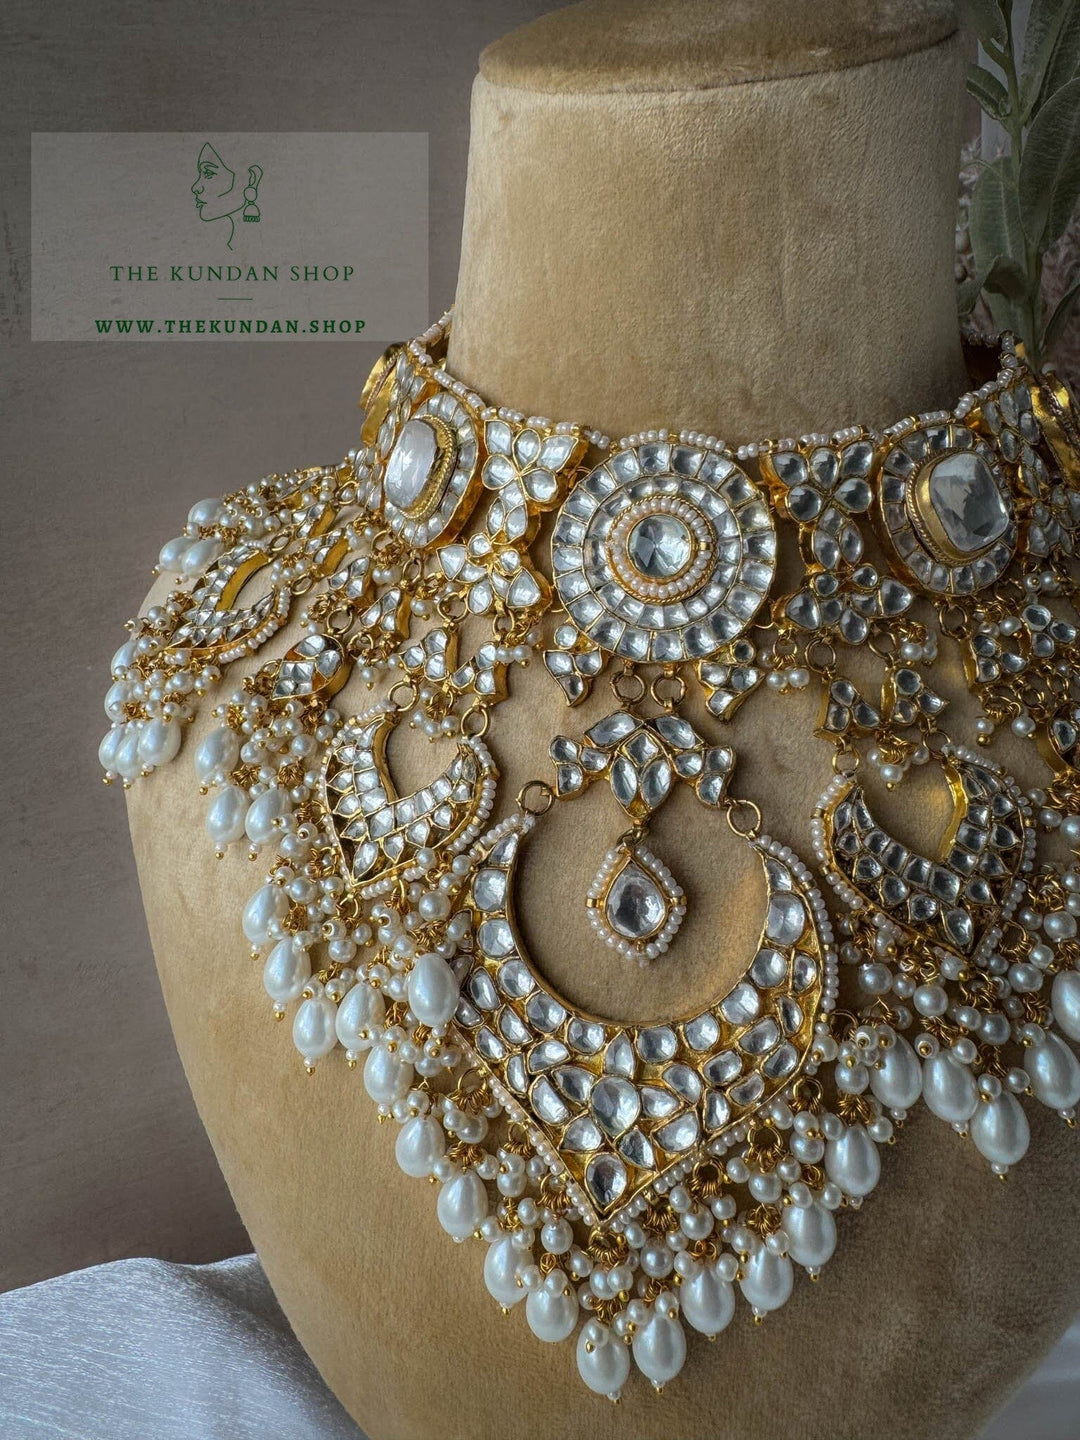 Valid in Pearls Necklace Sets THE KUNDAN SHOP 